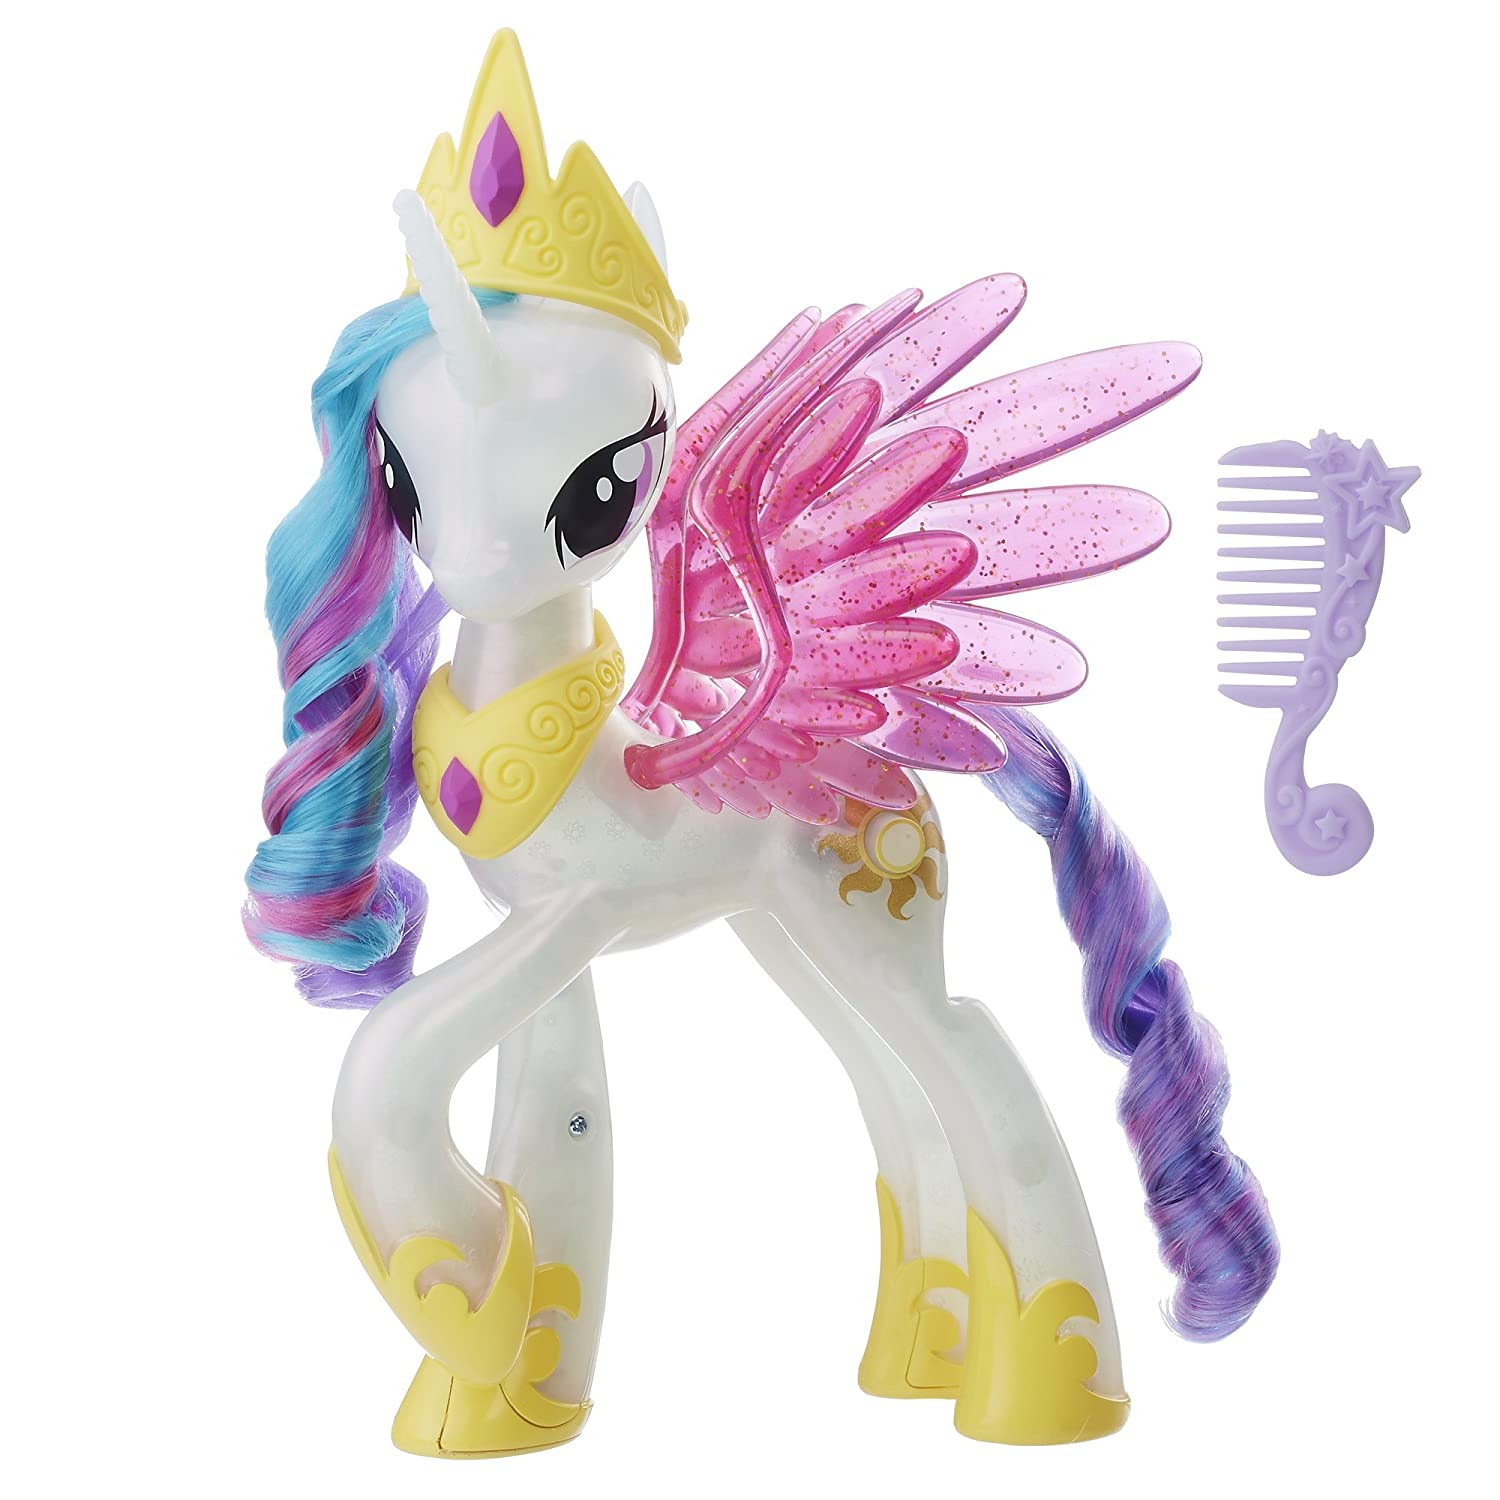 Top 11 Best My Little Pony Toys Reviews in 2023 10